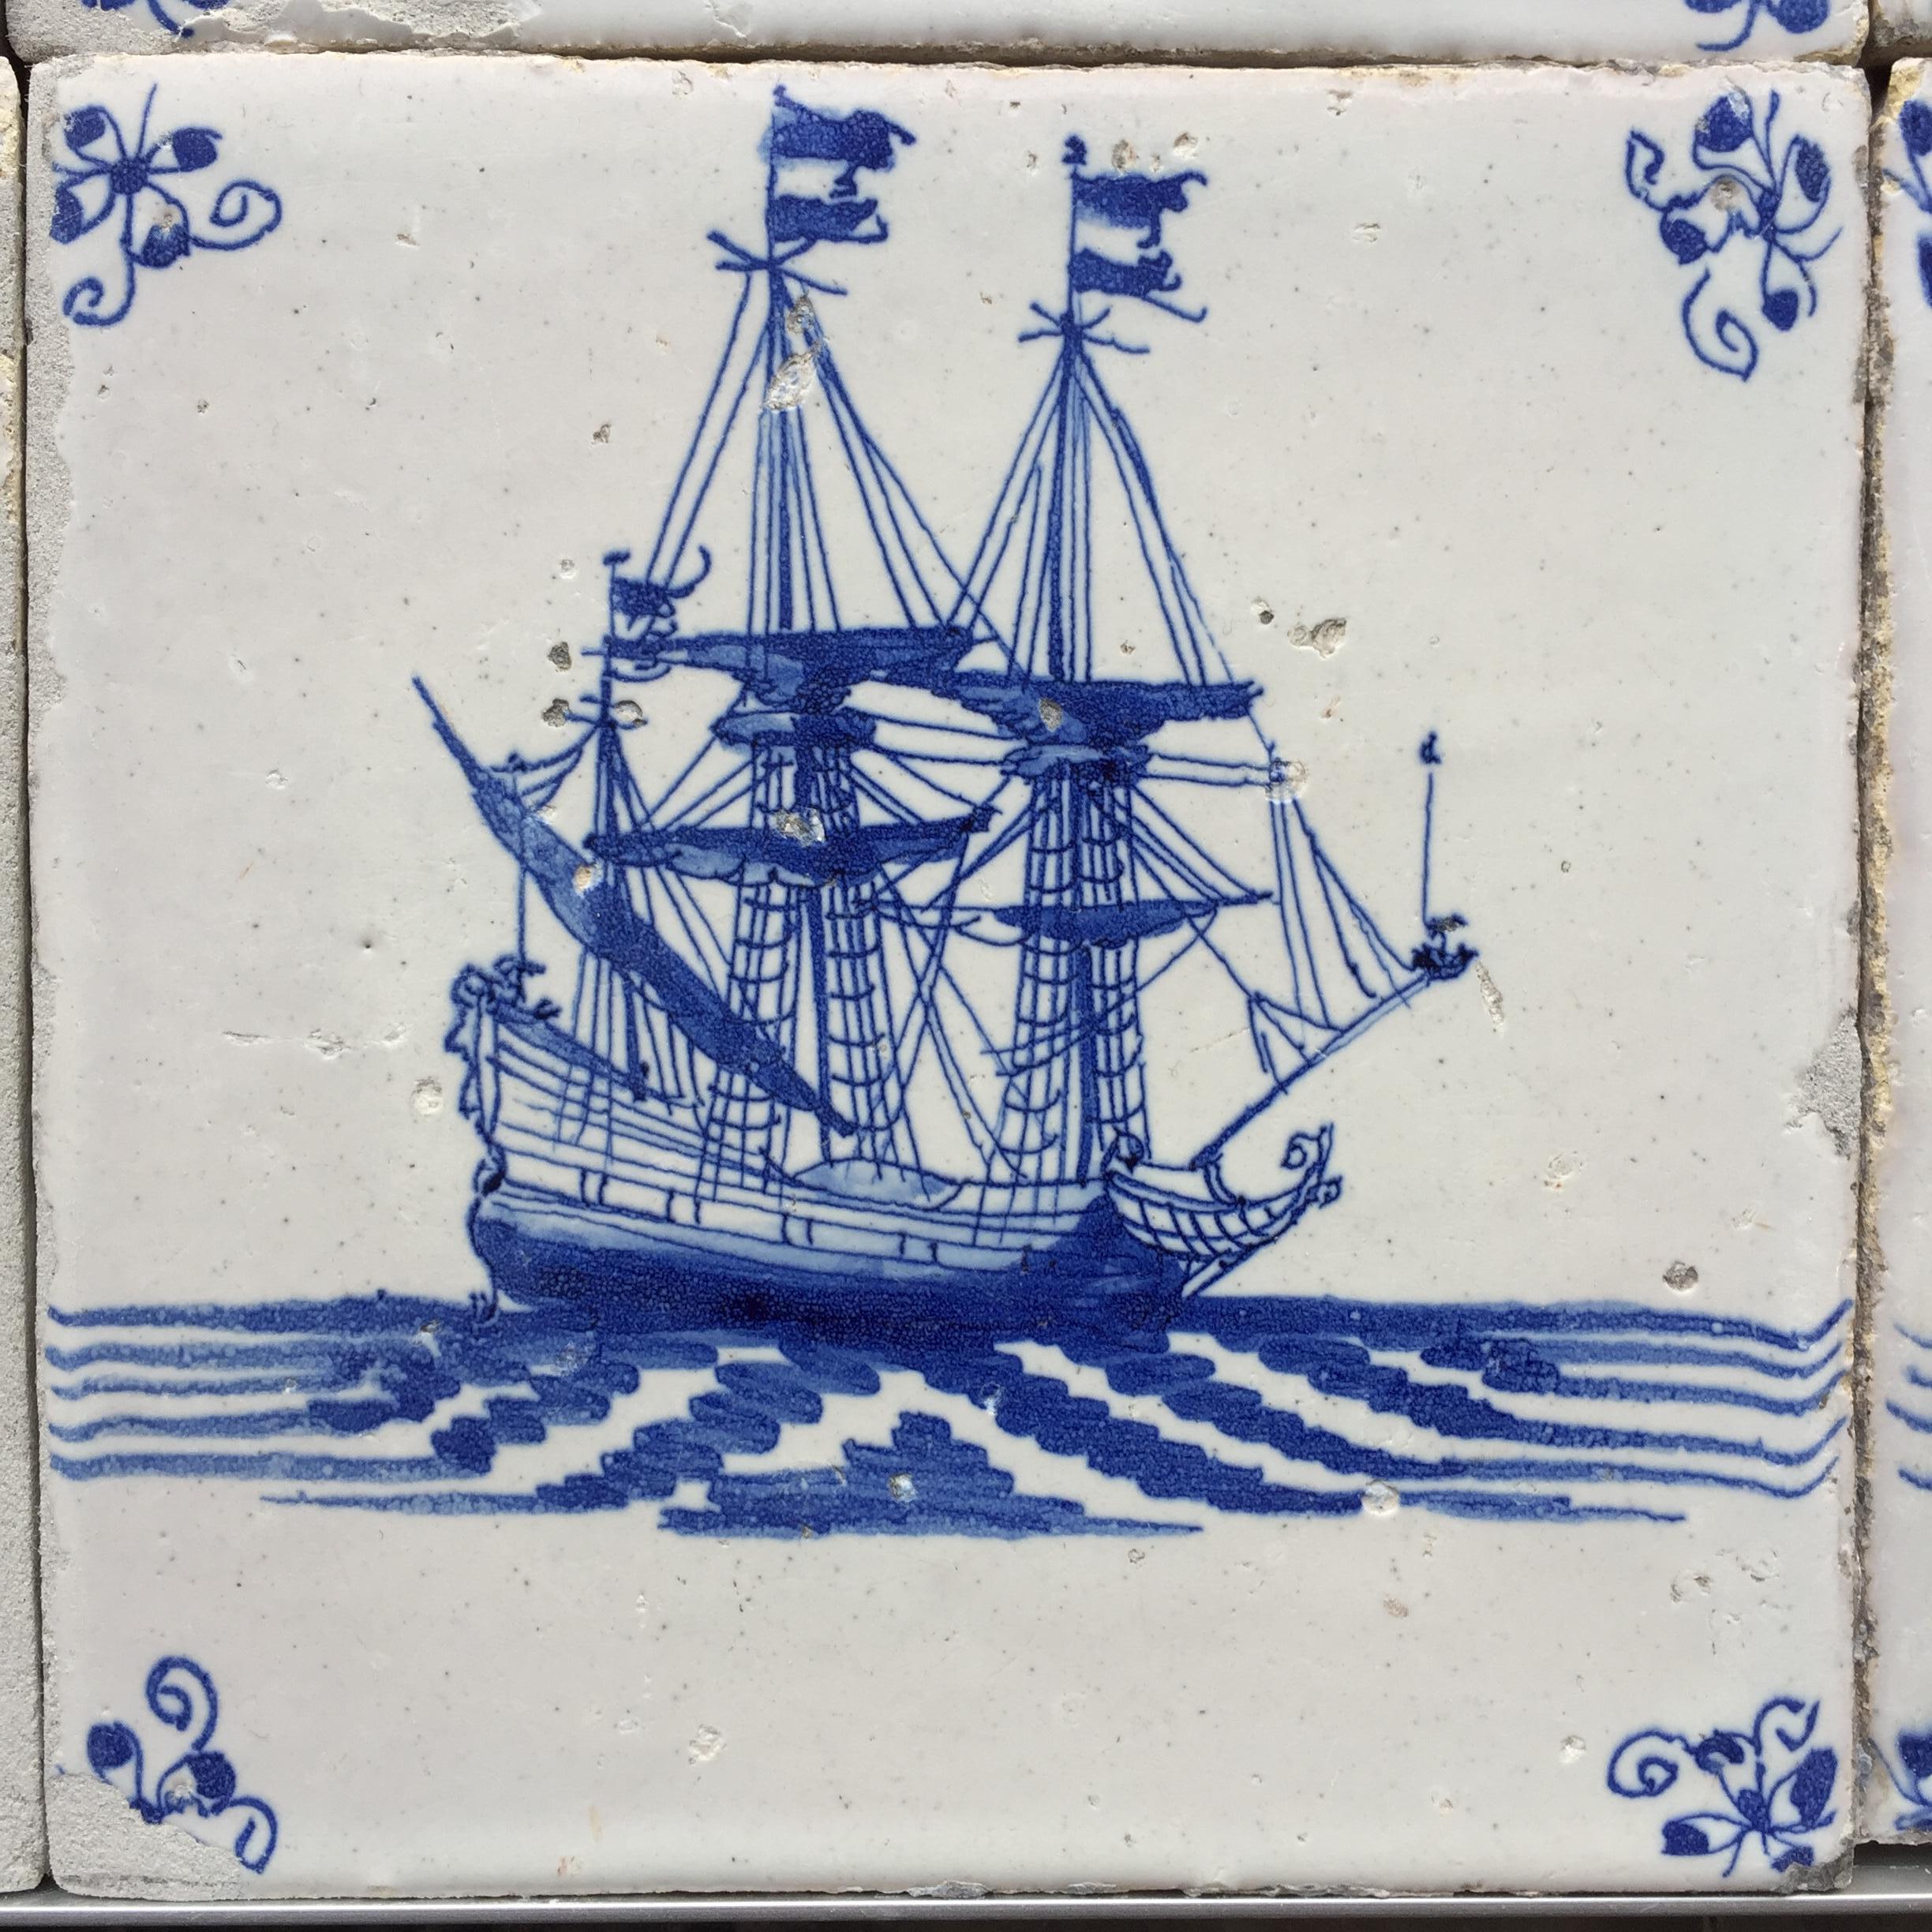 Ceramic Rare Set of 12 Blue and White Dutch Delft Tiles with Ships